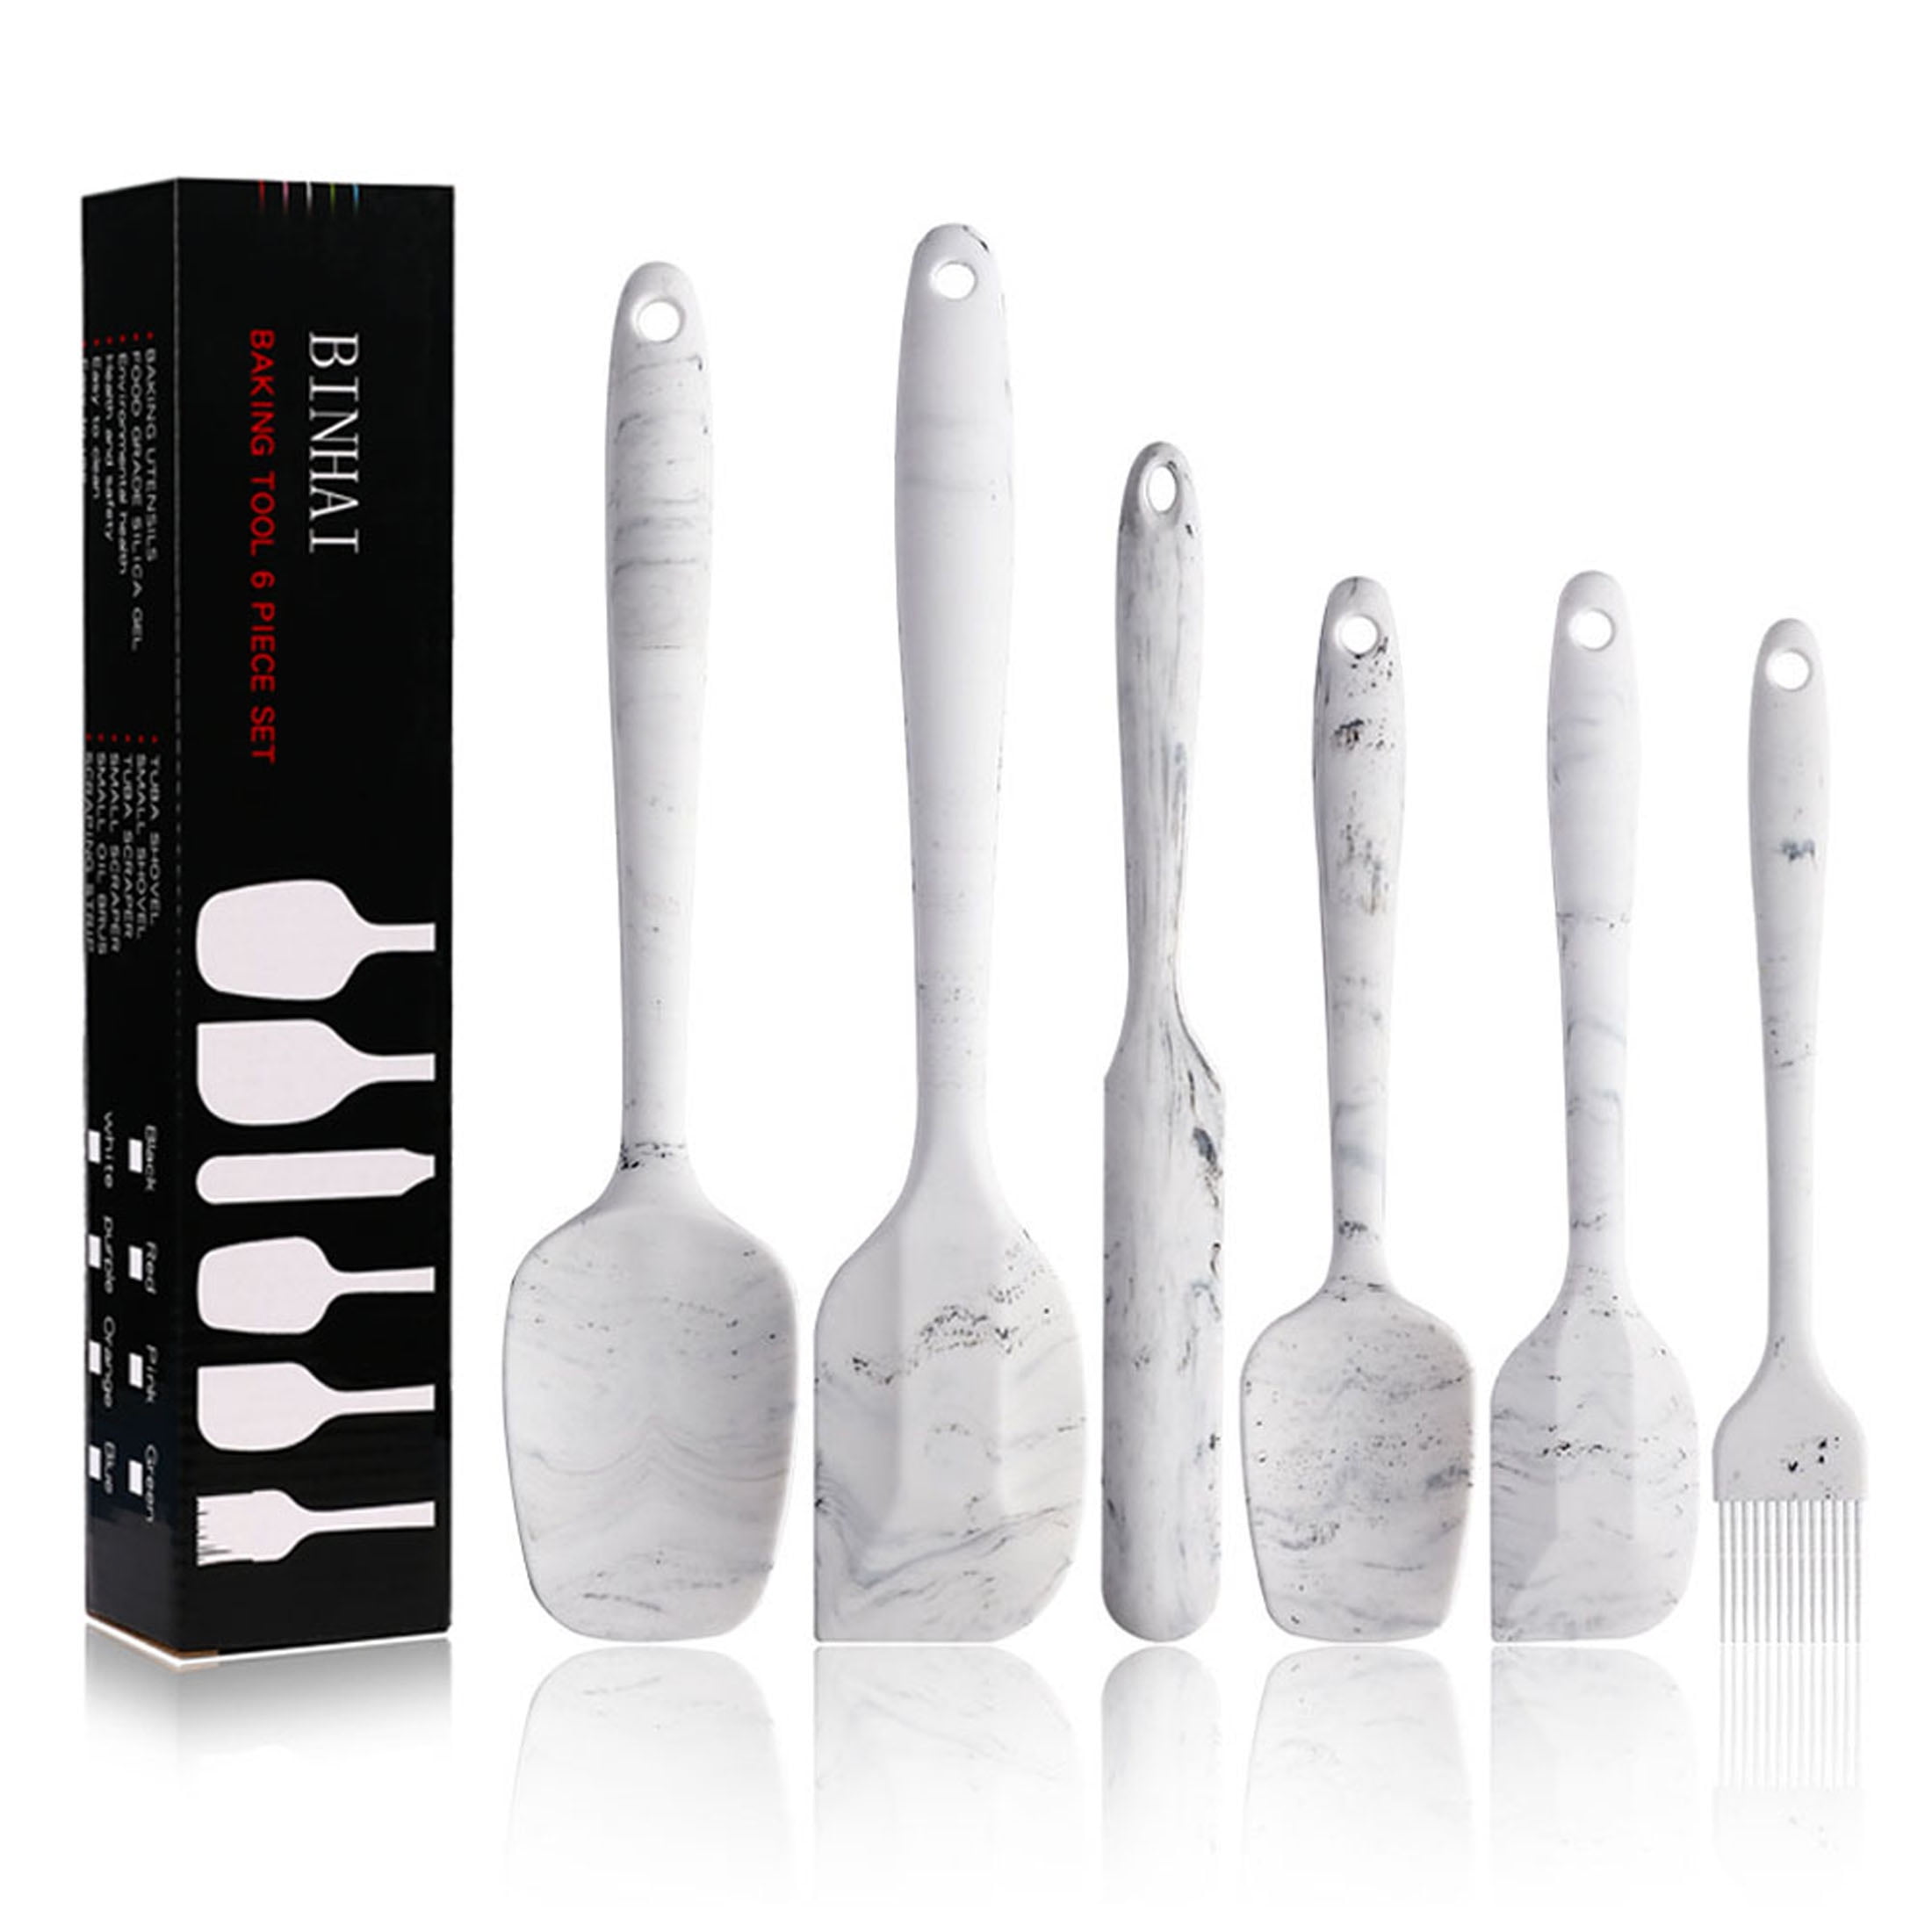 Silicone Spoon,6 Pieces Nonstick Silicone Spoons for Cooking